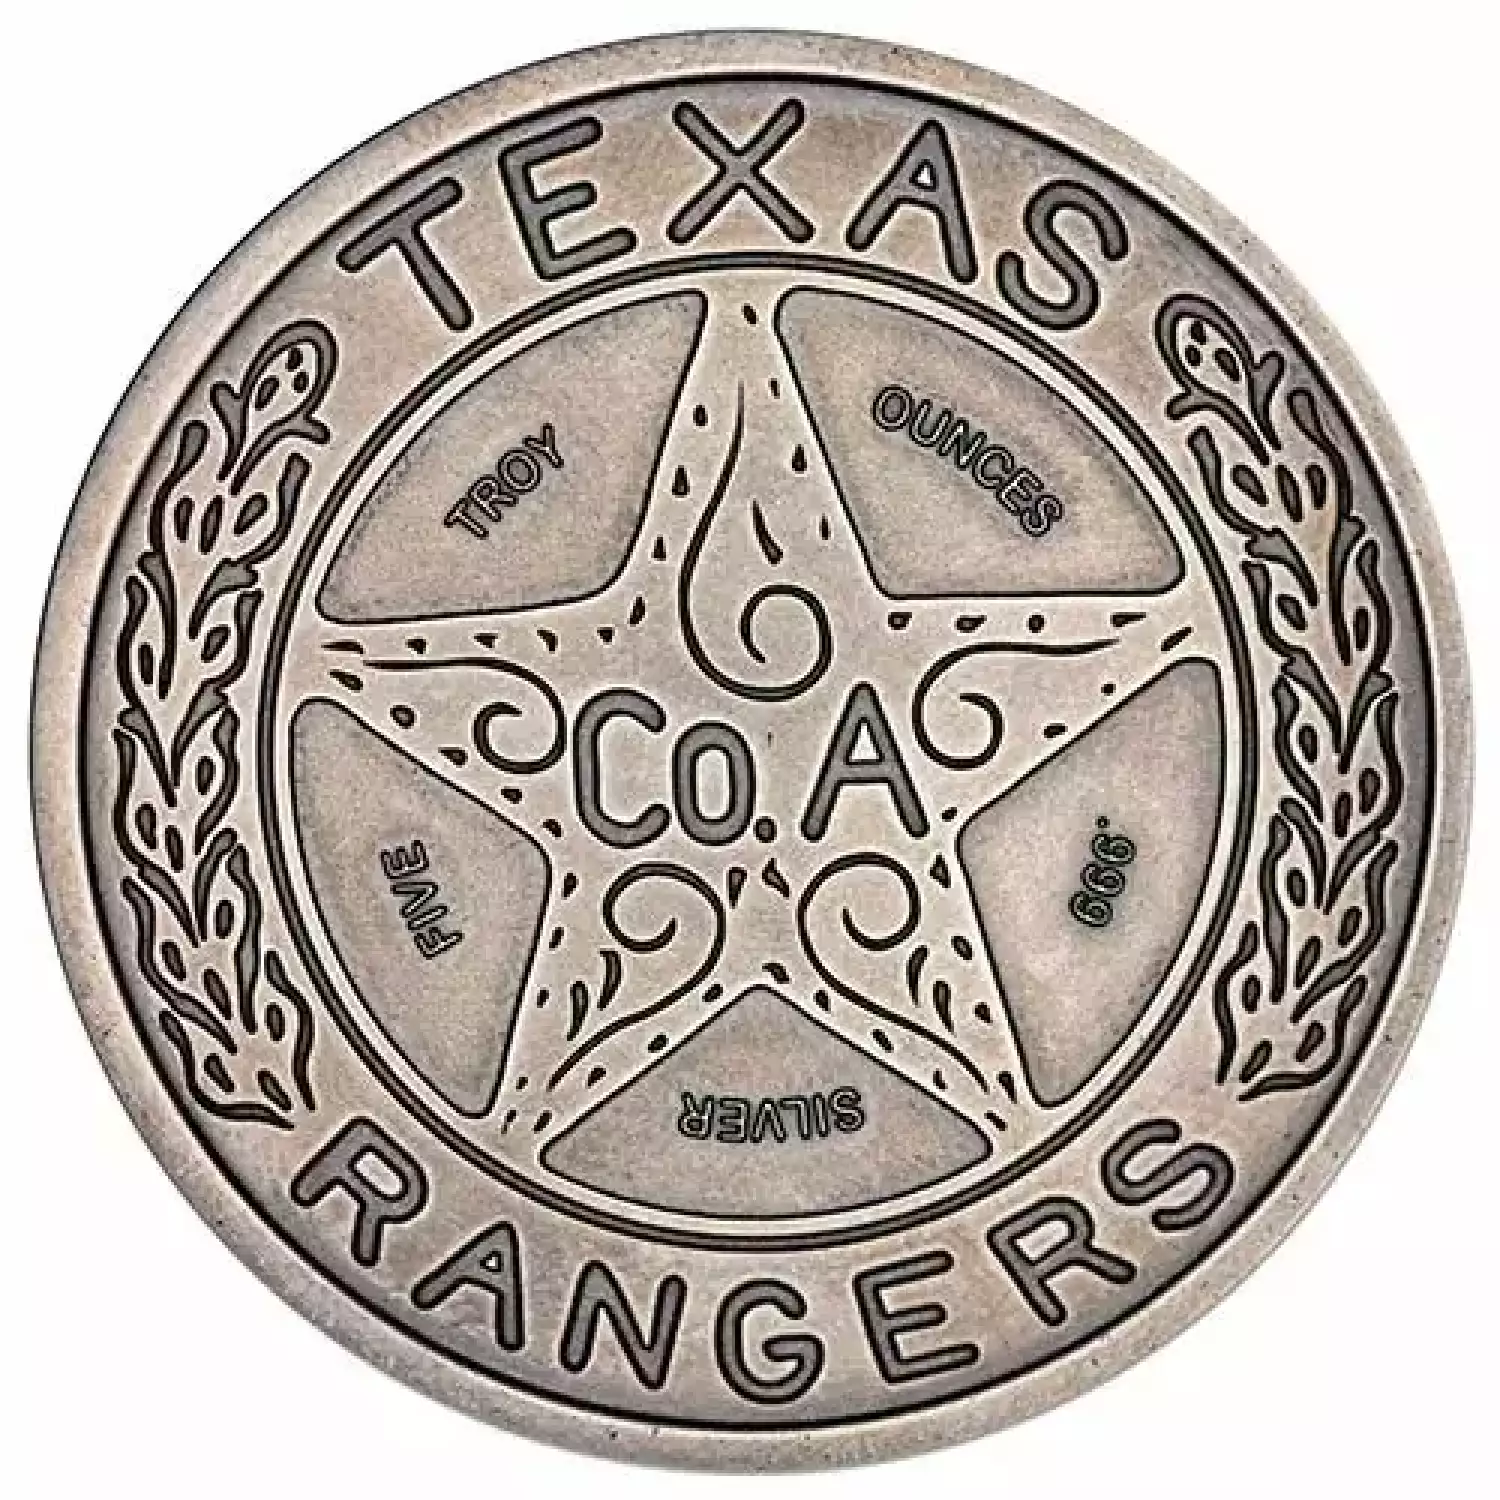 Rare 1930's Special Texas Ranger Badge of a Field Inspector of the Texas &  Southwestern Cattle Assn.: Flying Tiger Antiques Online Store